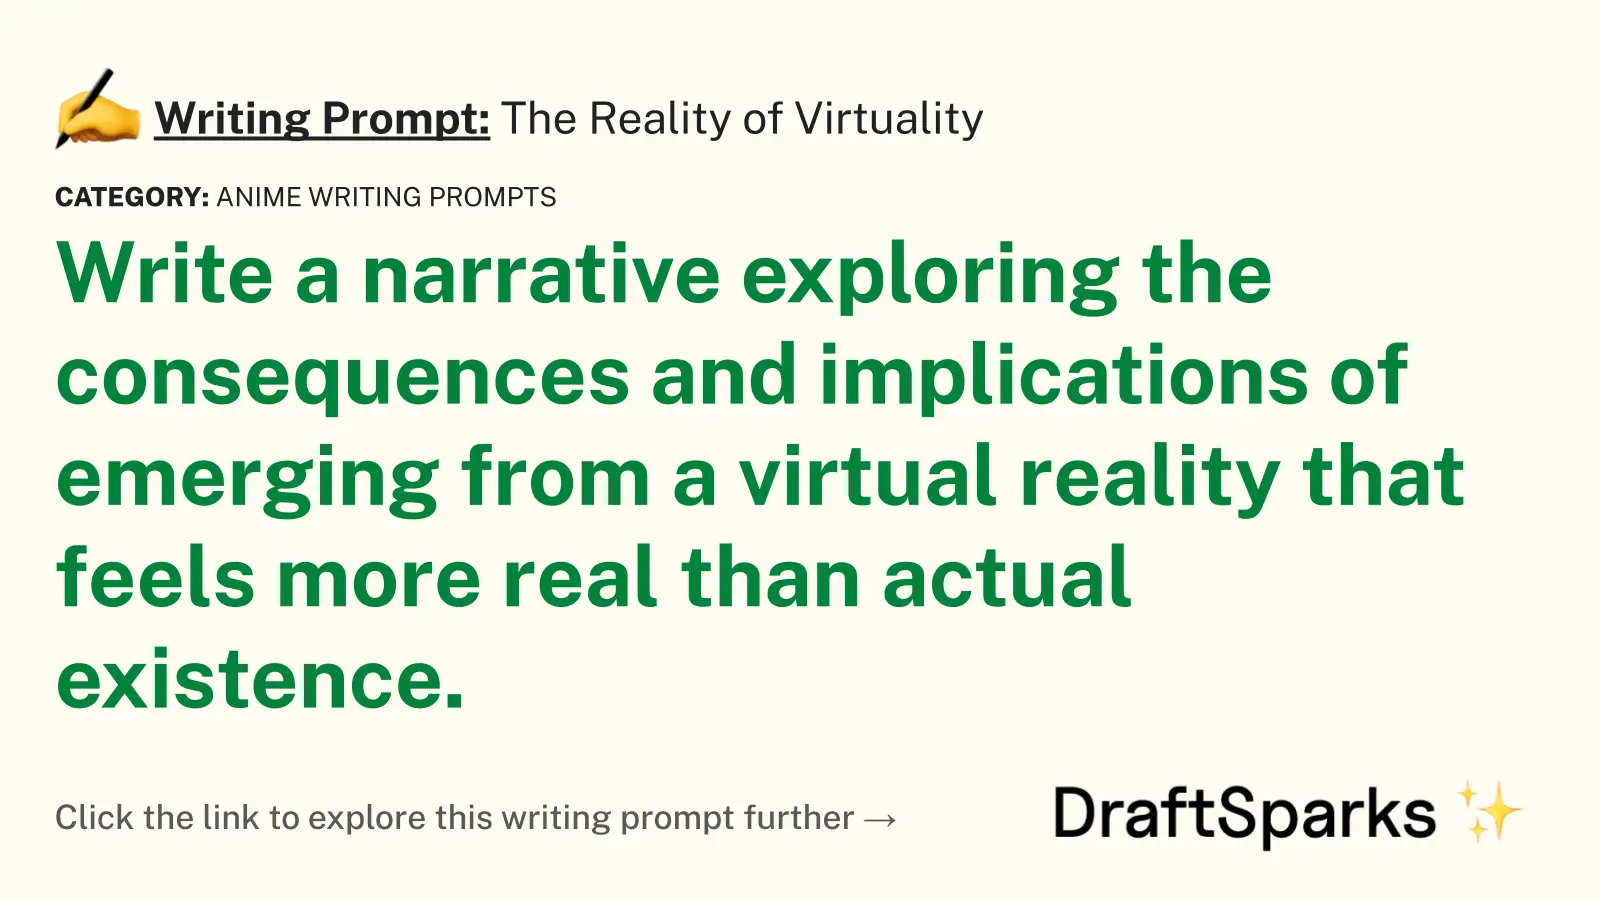 The Reality of Virtuality